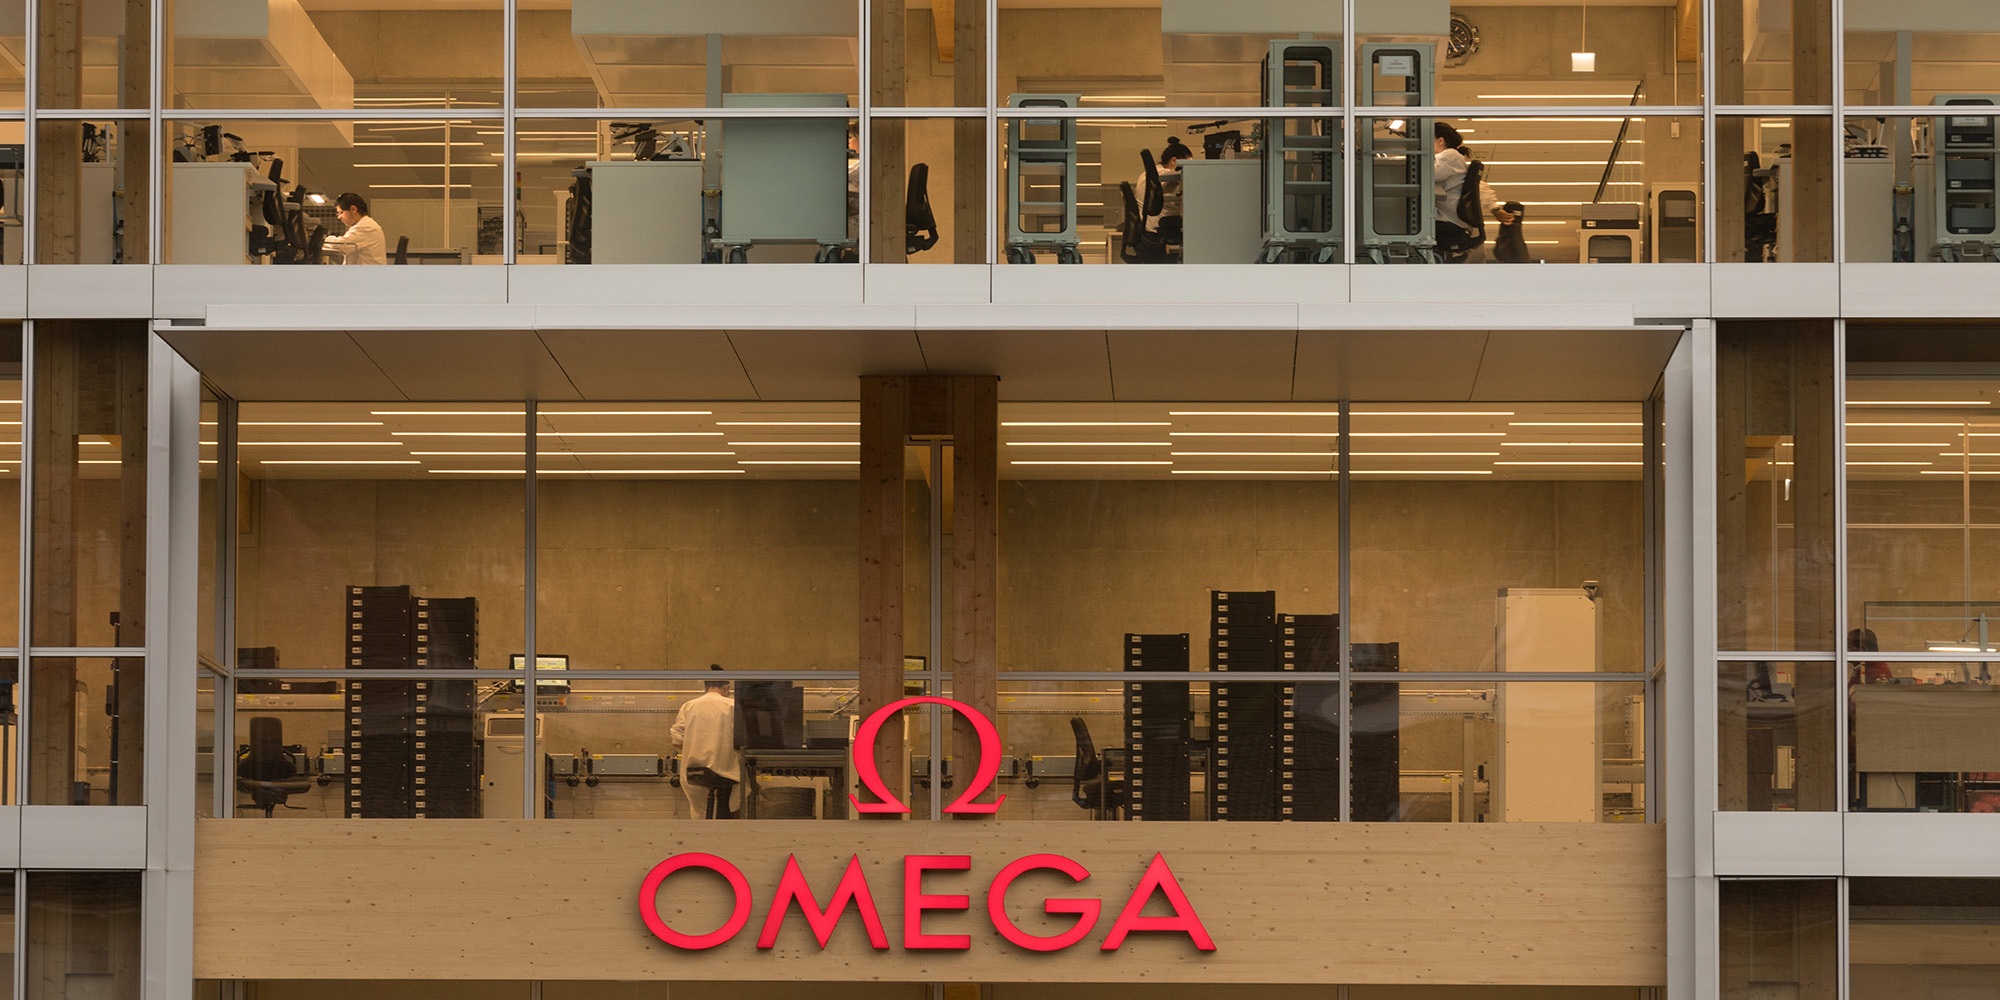 Large Omega lettering in red on the new timber office building with glazed front. In the background, personnel can be seen at their workstations.